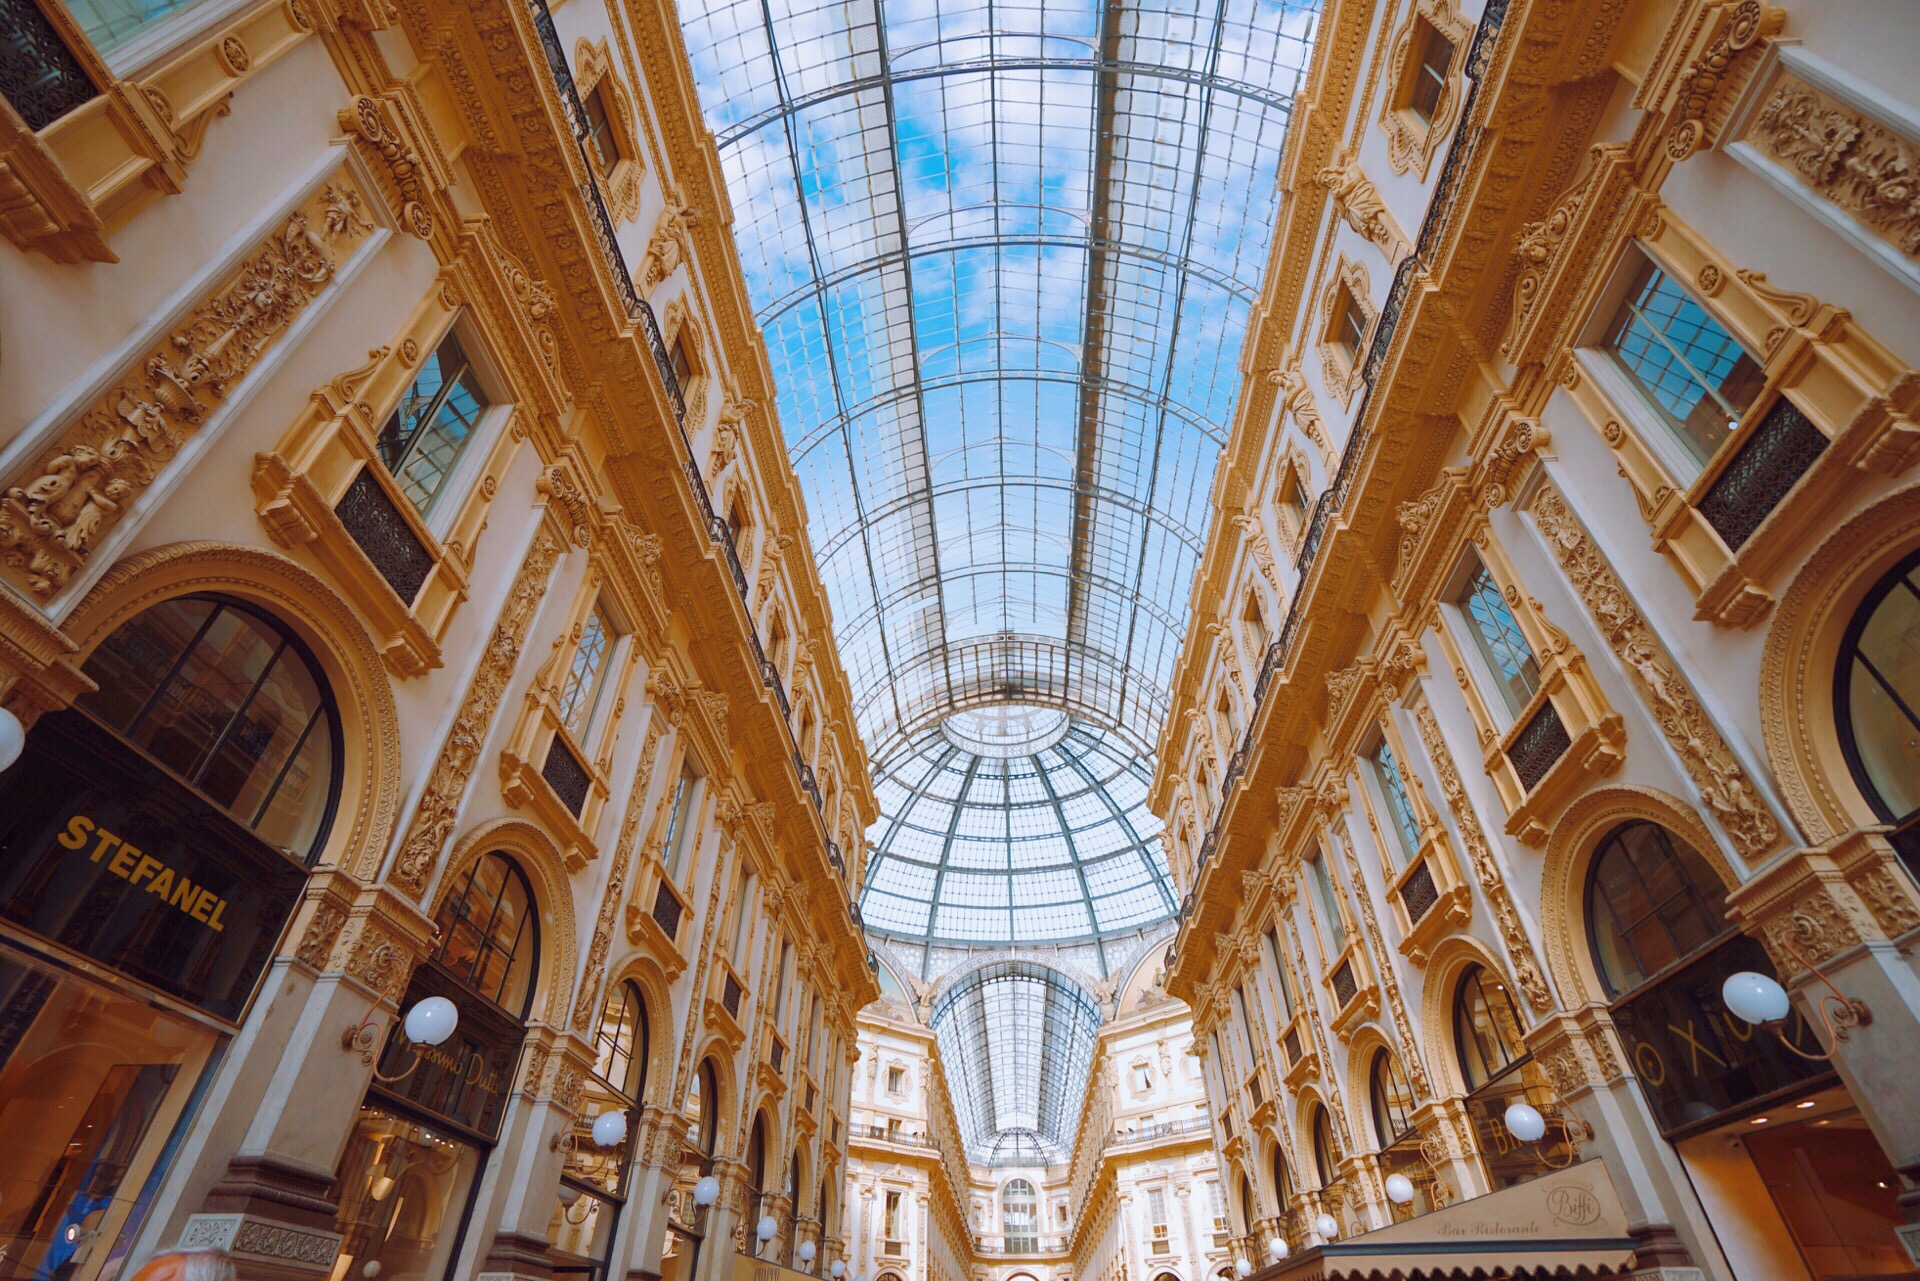 The Golden Glow of Lights in the Galleria Vittorio Emanuele II at